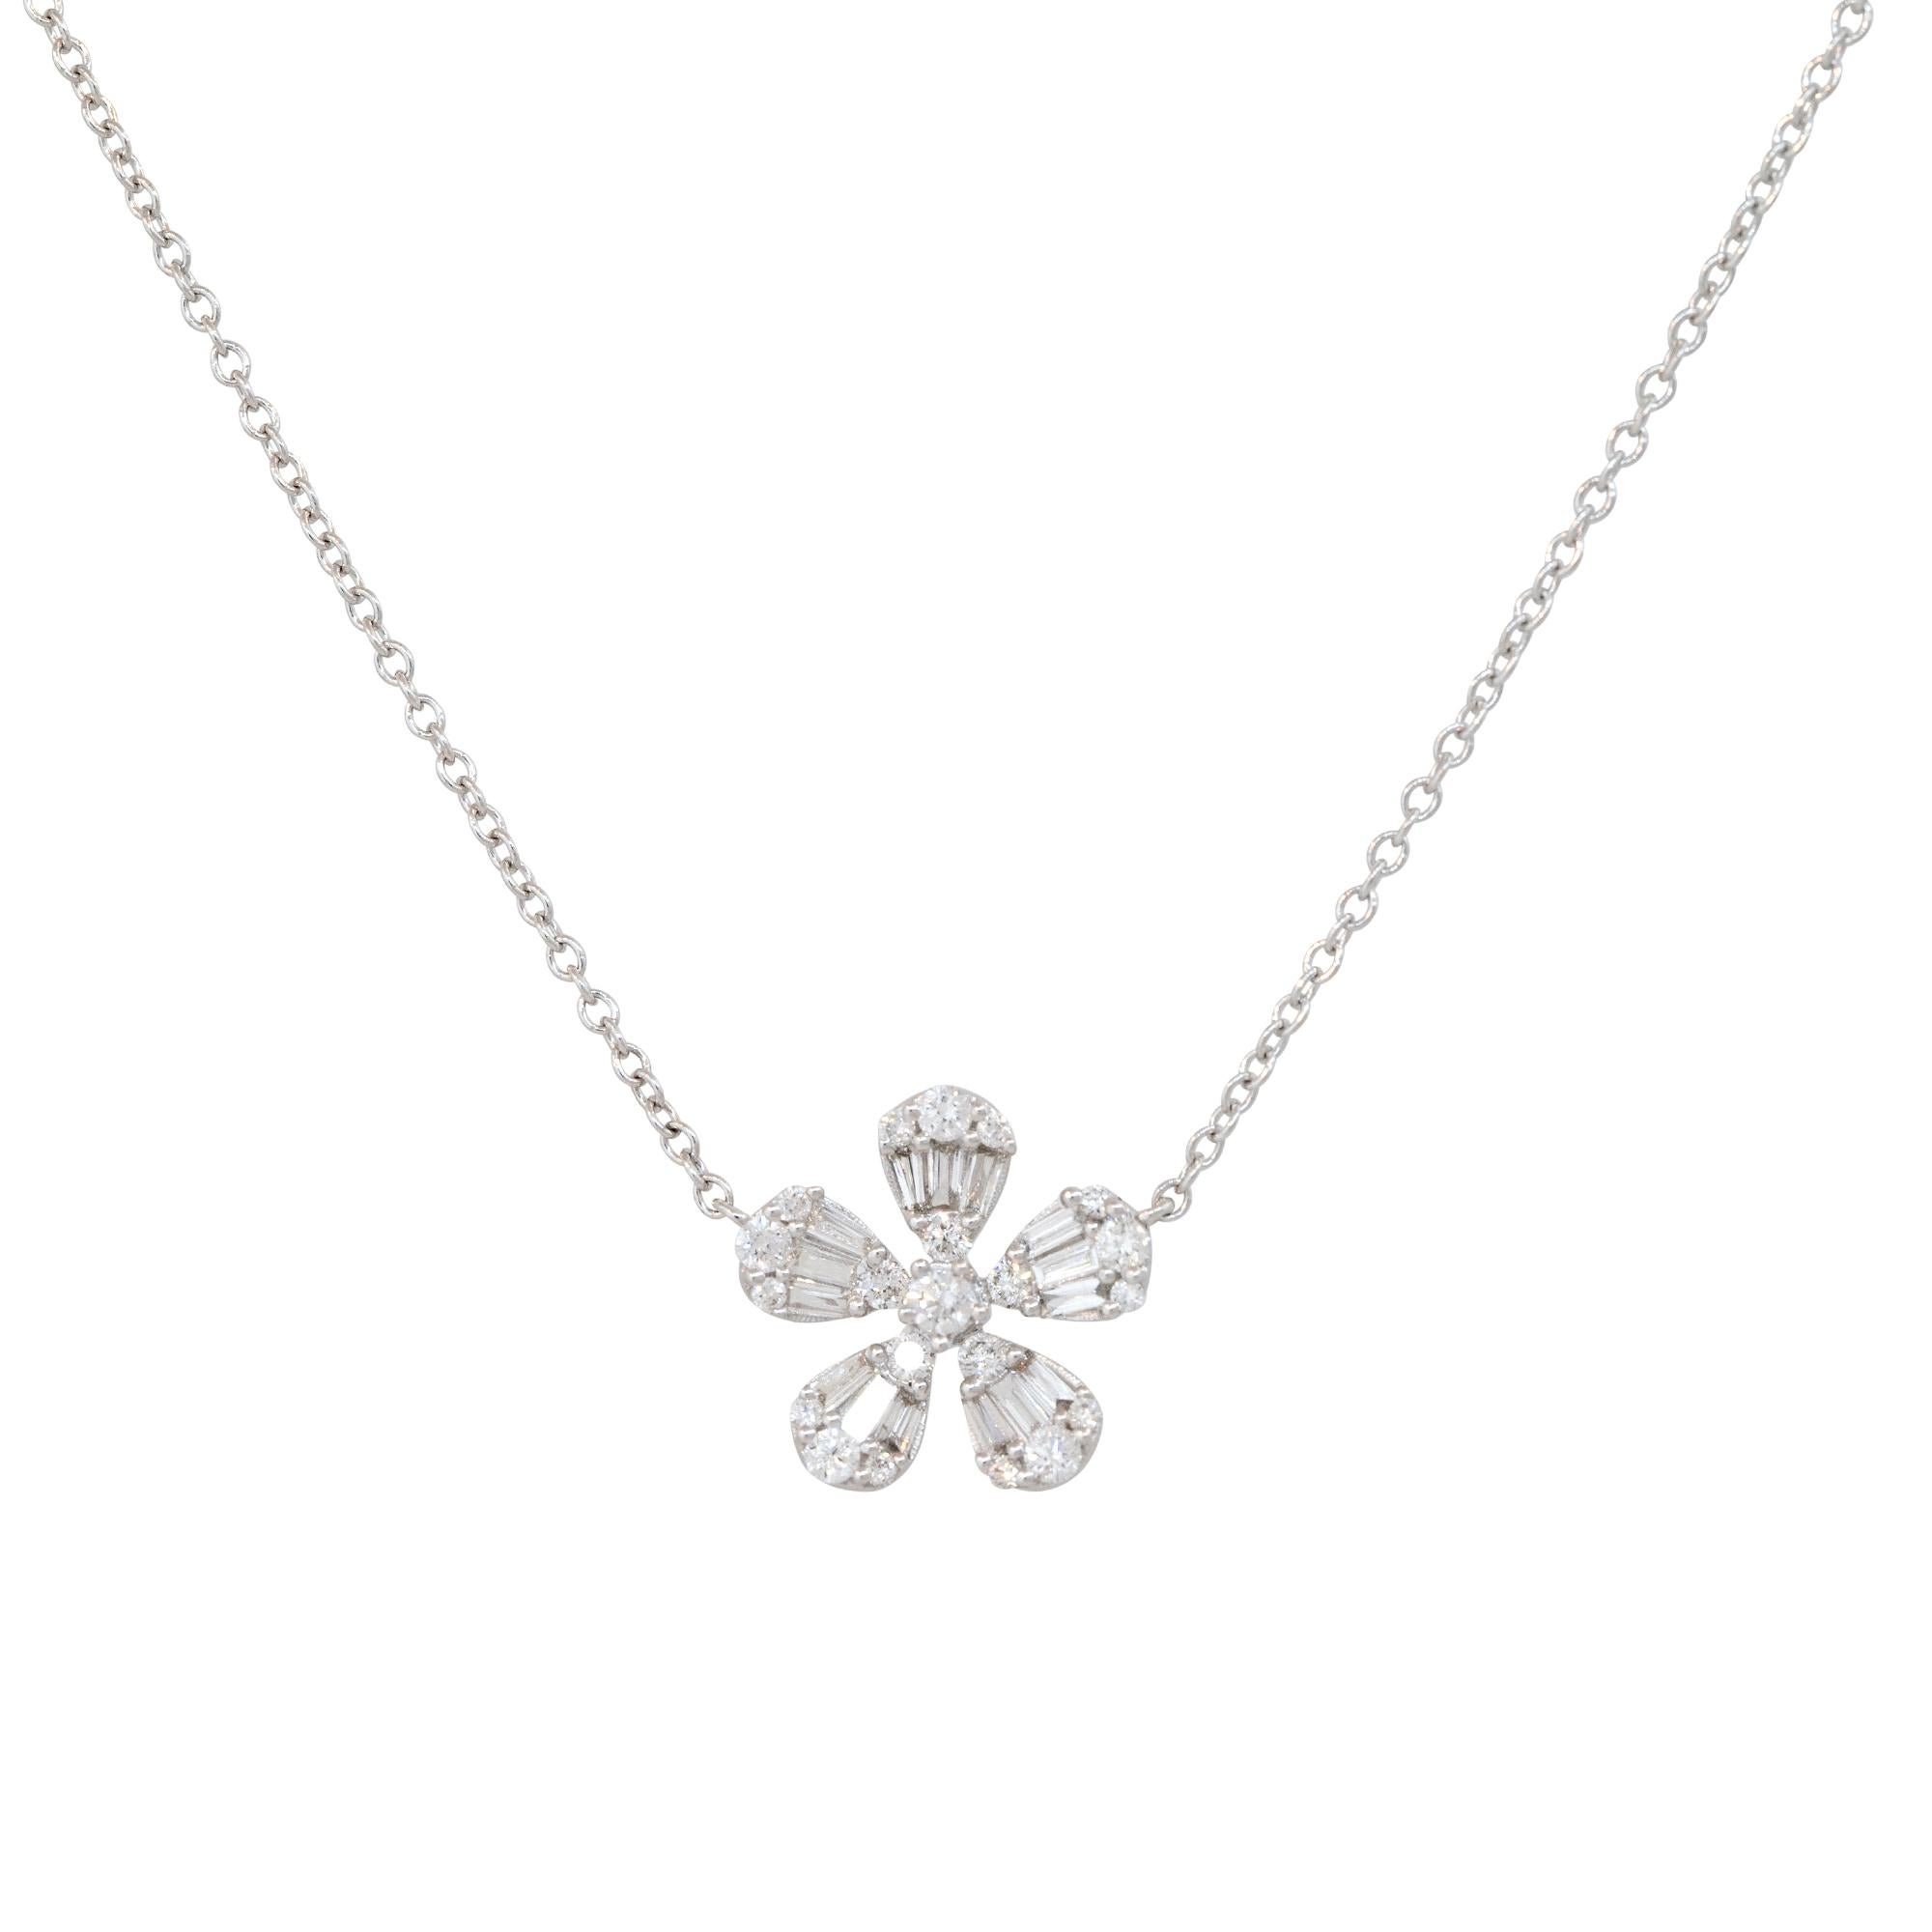 18k White Gold 0.41ctw Pave Diamond Flower Necklace
Material: 18k White Gold
Diamond Details: There are approximately 0.41 carats of Round Brilliant and Baguette cut Diamonds. All diamonds are approximately G/H in color and approximately SI in